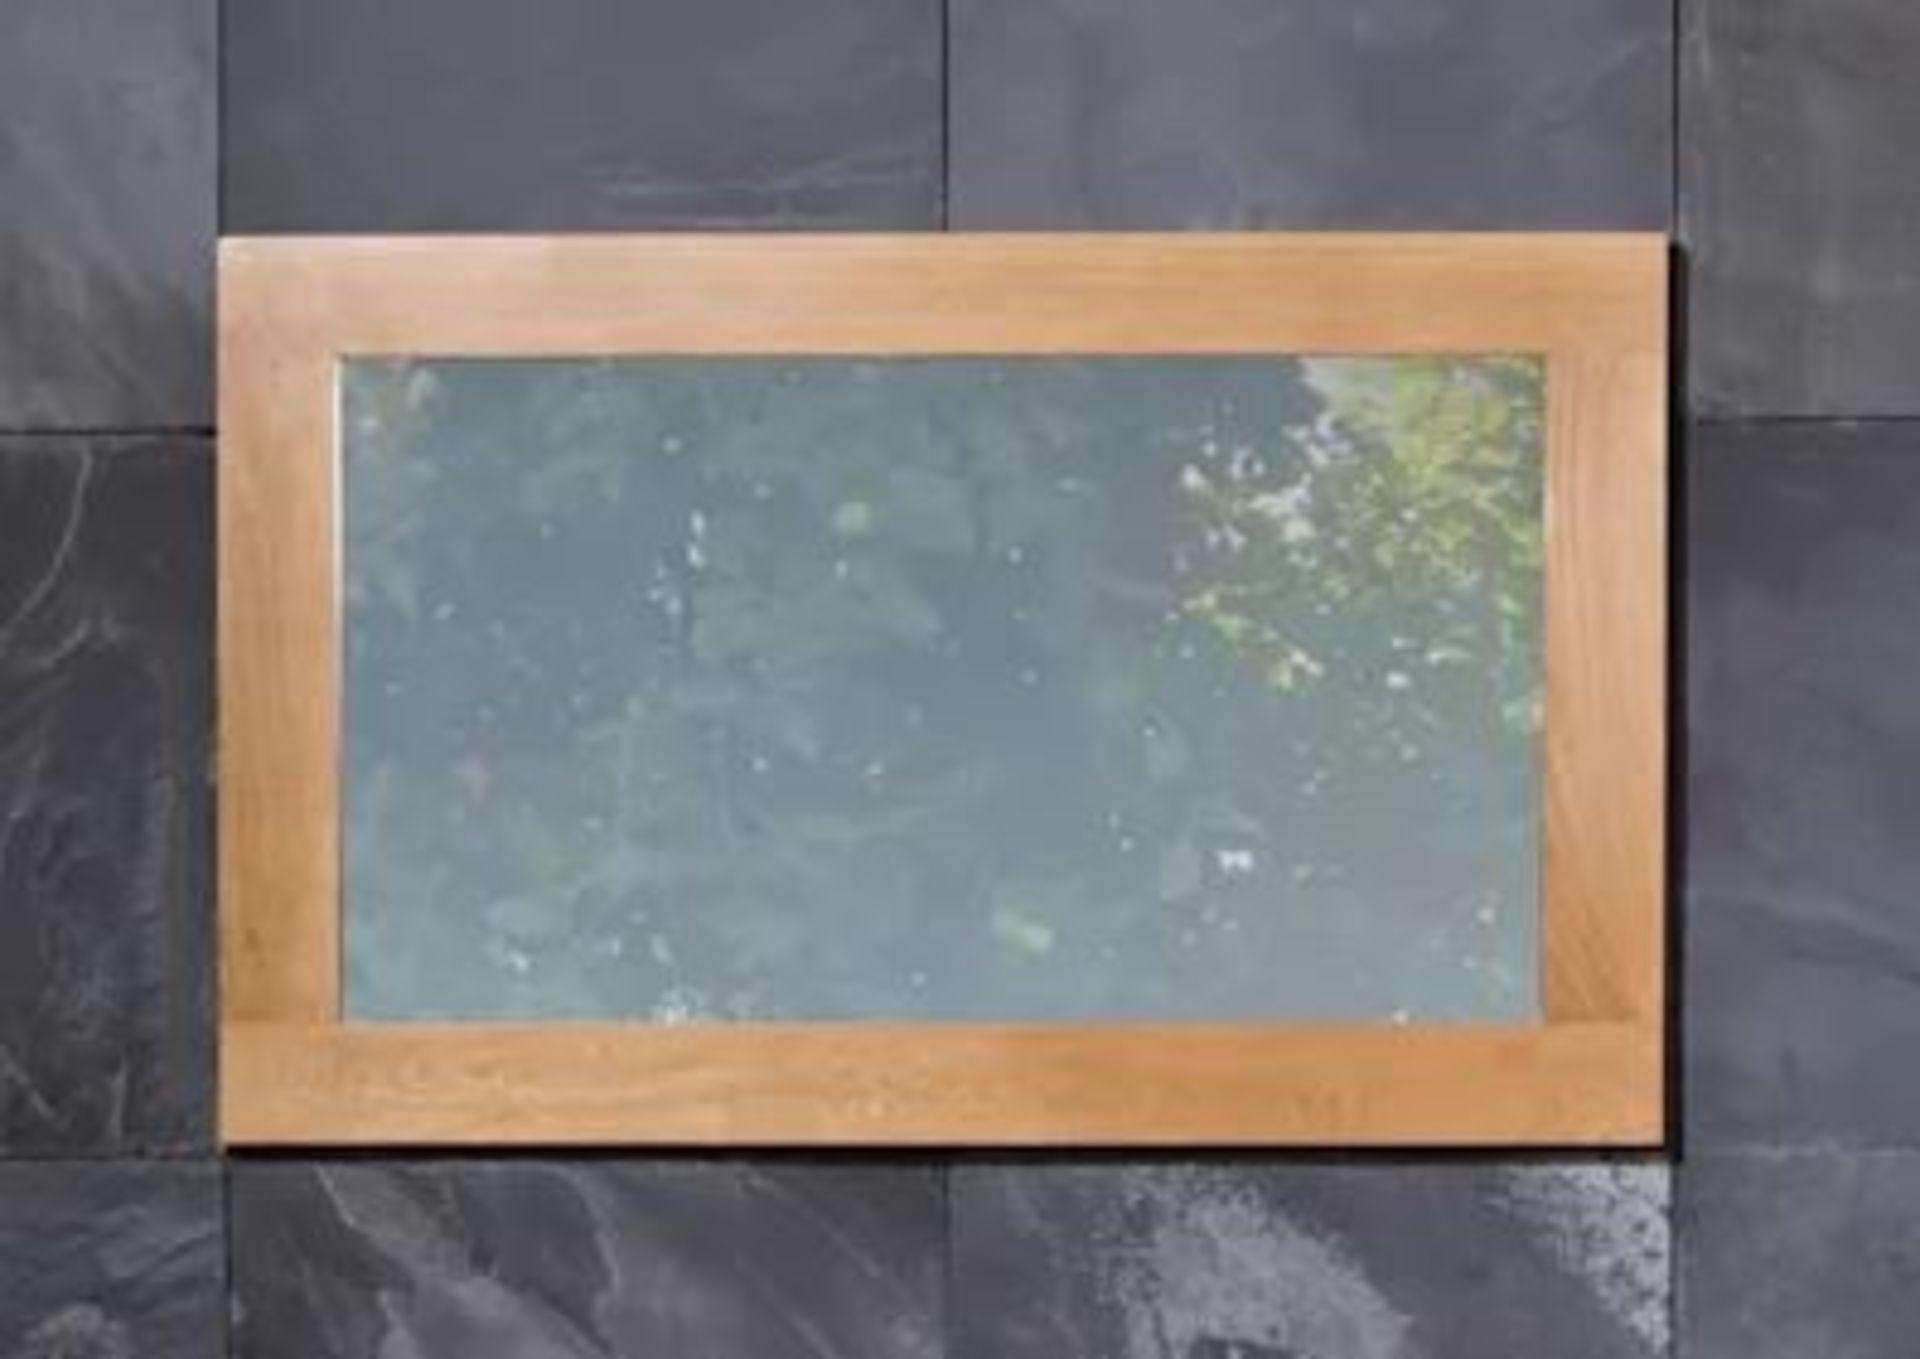 1 x Stonearth Medium Wall Mirror Frame - American Solid Oak Frame For Mirrors or Pictures - Image 7 of 12